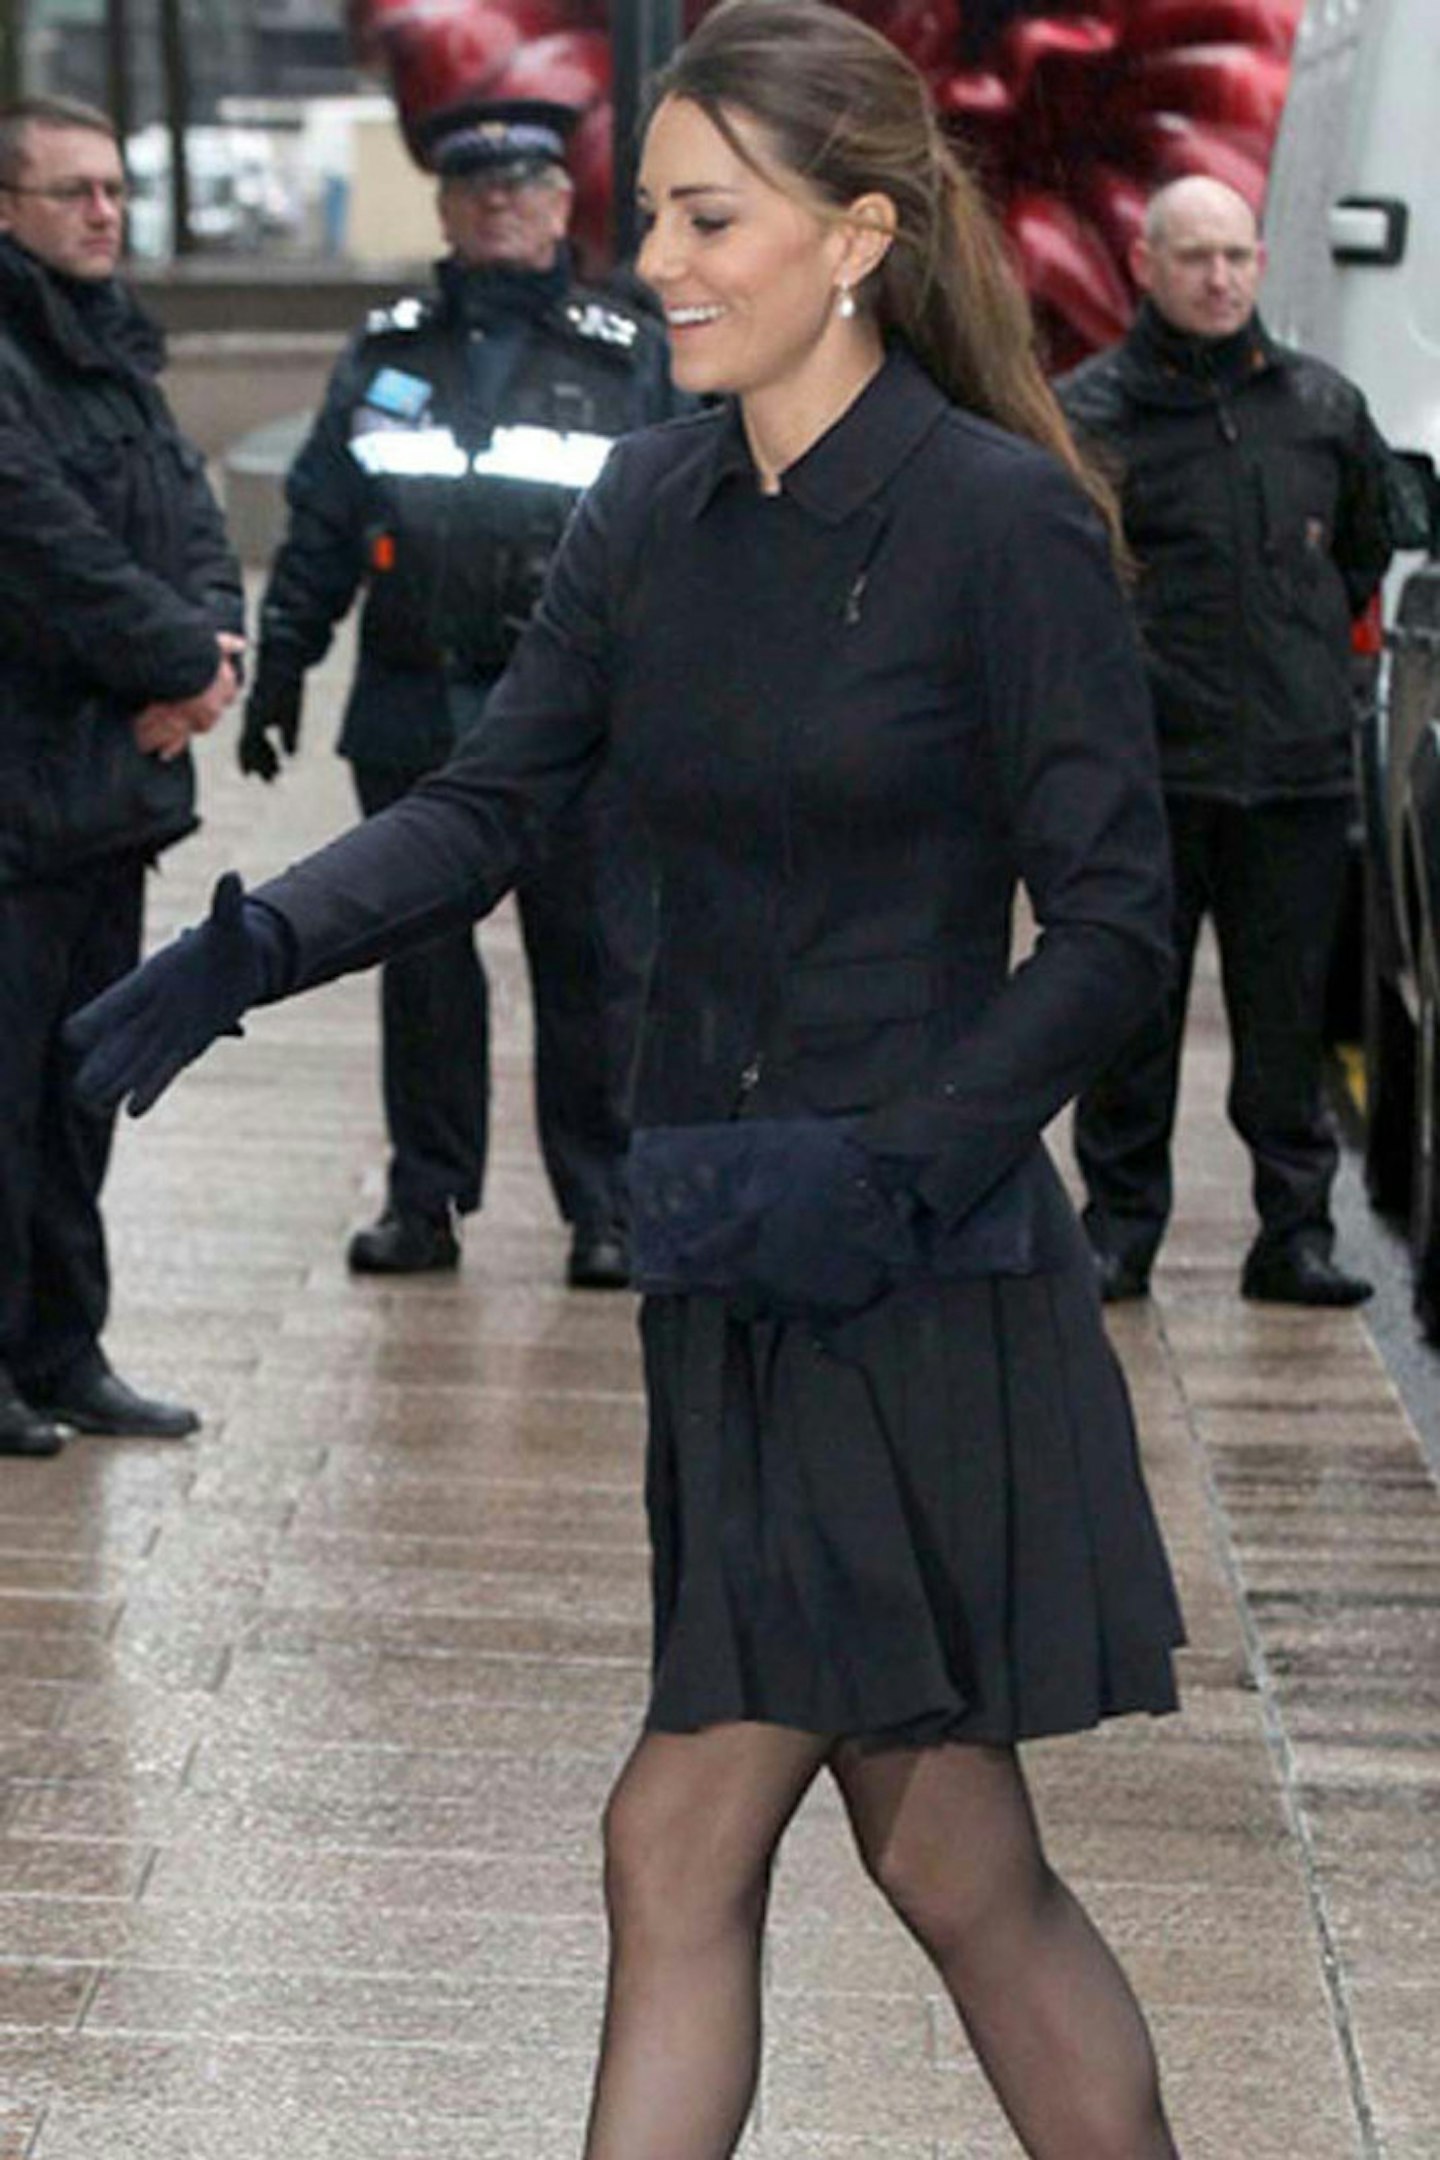 The Duchess of Cambridge in an Orla Kiely skirt and Max Mara jacket at a Place2Be charity event, 20 November 2013